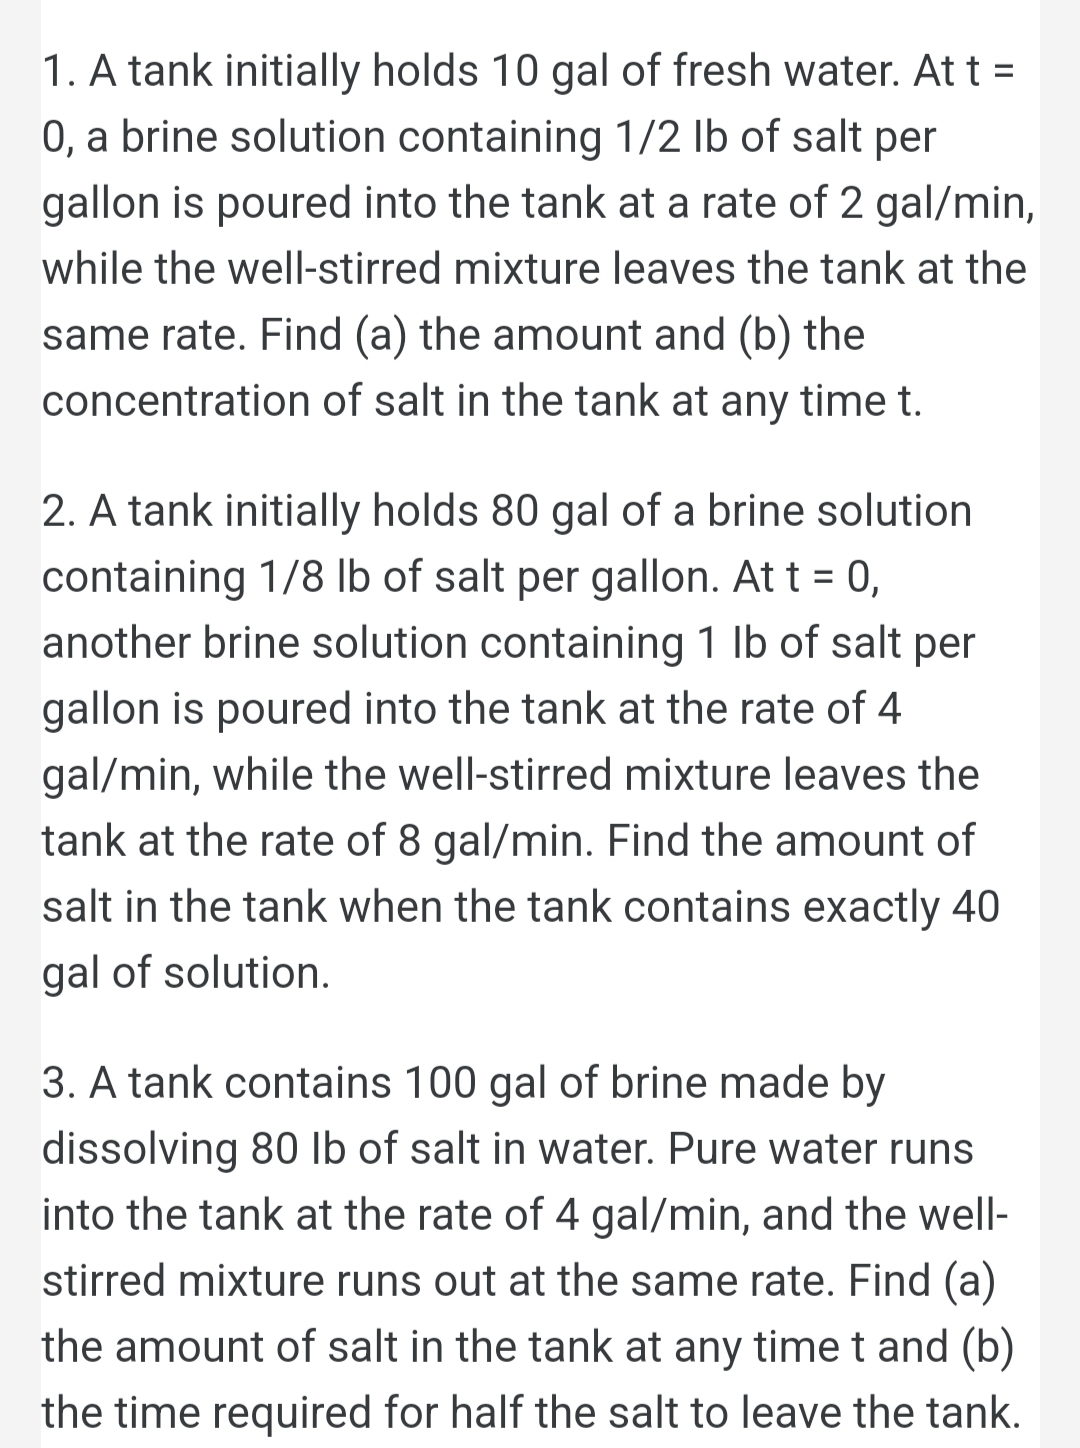 1. A tank initially holds 10 gal of fresh water. At t =
0, a brine solution containing 1/2 lb of salt per
gallon is poured into the tank at a rate of 2 gal/min,
while the well-stirred mixture leaves the tank at the
same rate. Find (a) the amount and (b) the
concentration of salt in the tank at any time t.
2. A tank initially holds 80 gal of a brine solution
containing 1/8 lb of salt per gallon. At t = 0,
another brine solution containing 1 lb of salt per
gallon is poured into the tank at the rate of 4
gal/min, while the well-stirred mixture leaves the
tank at the rate of 8 gal/min. Find the amount of
salt in the tank when the tank contains exactly 40
gal of solution.
3. A tank contains 100 gal of brine made by
dissolving 80 lb of salt in water. Pure water runs
into the tank at the rate of 4 gal/min, and the well-
stirred mixture runs out at the same rate. Find (a)
the amount of salt in the tank at any time t and (b)
the time required for half the salt to leave the tank.